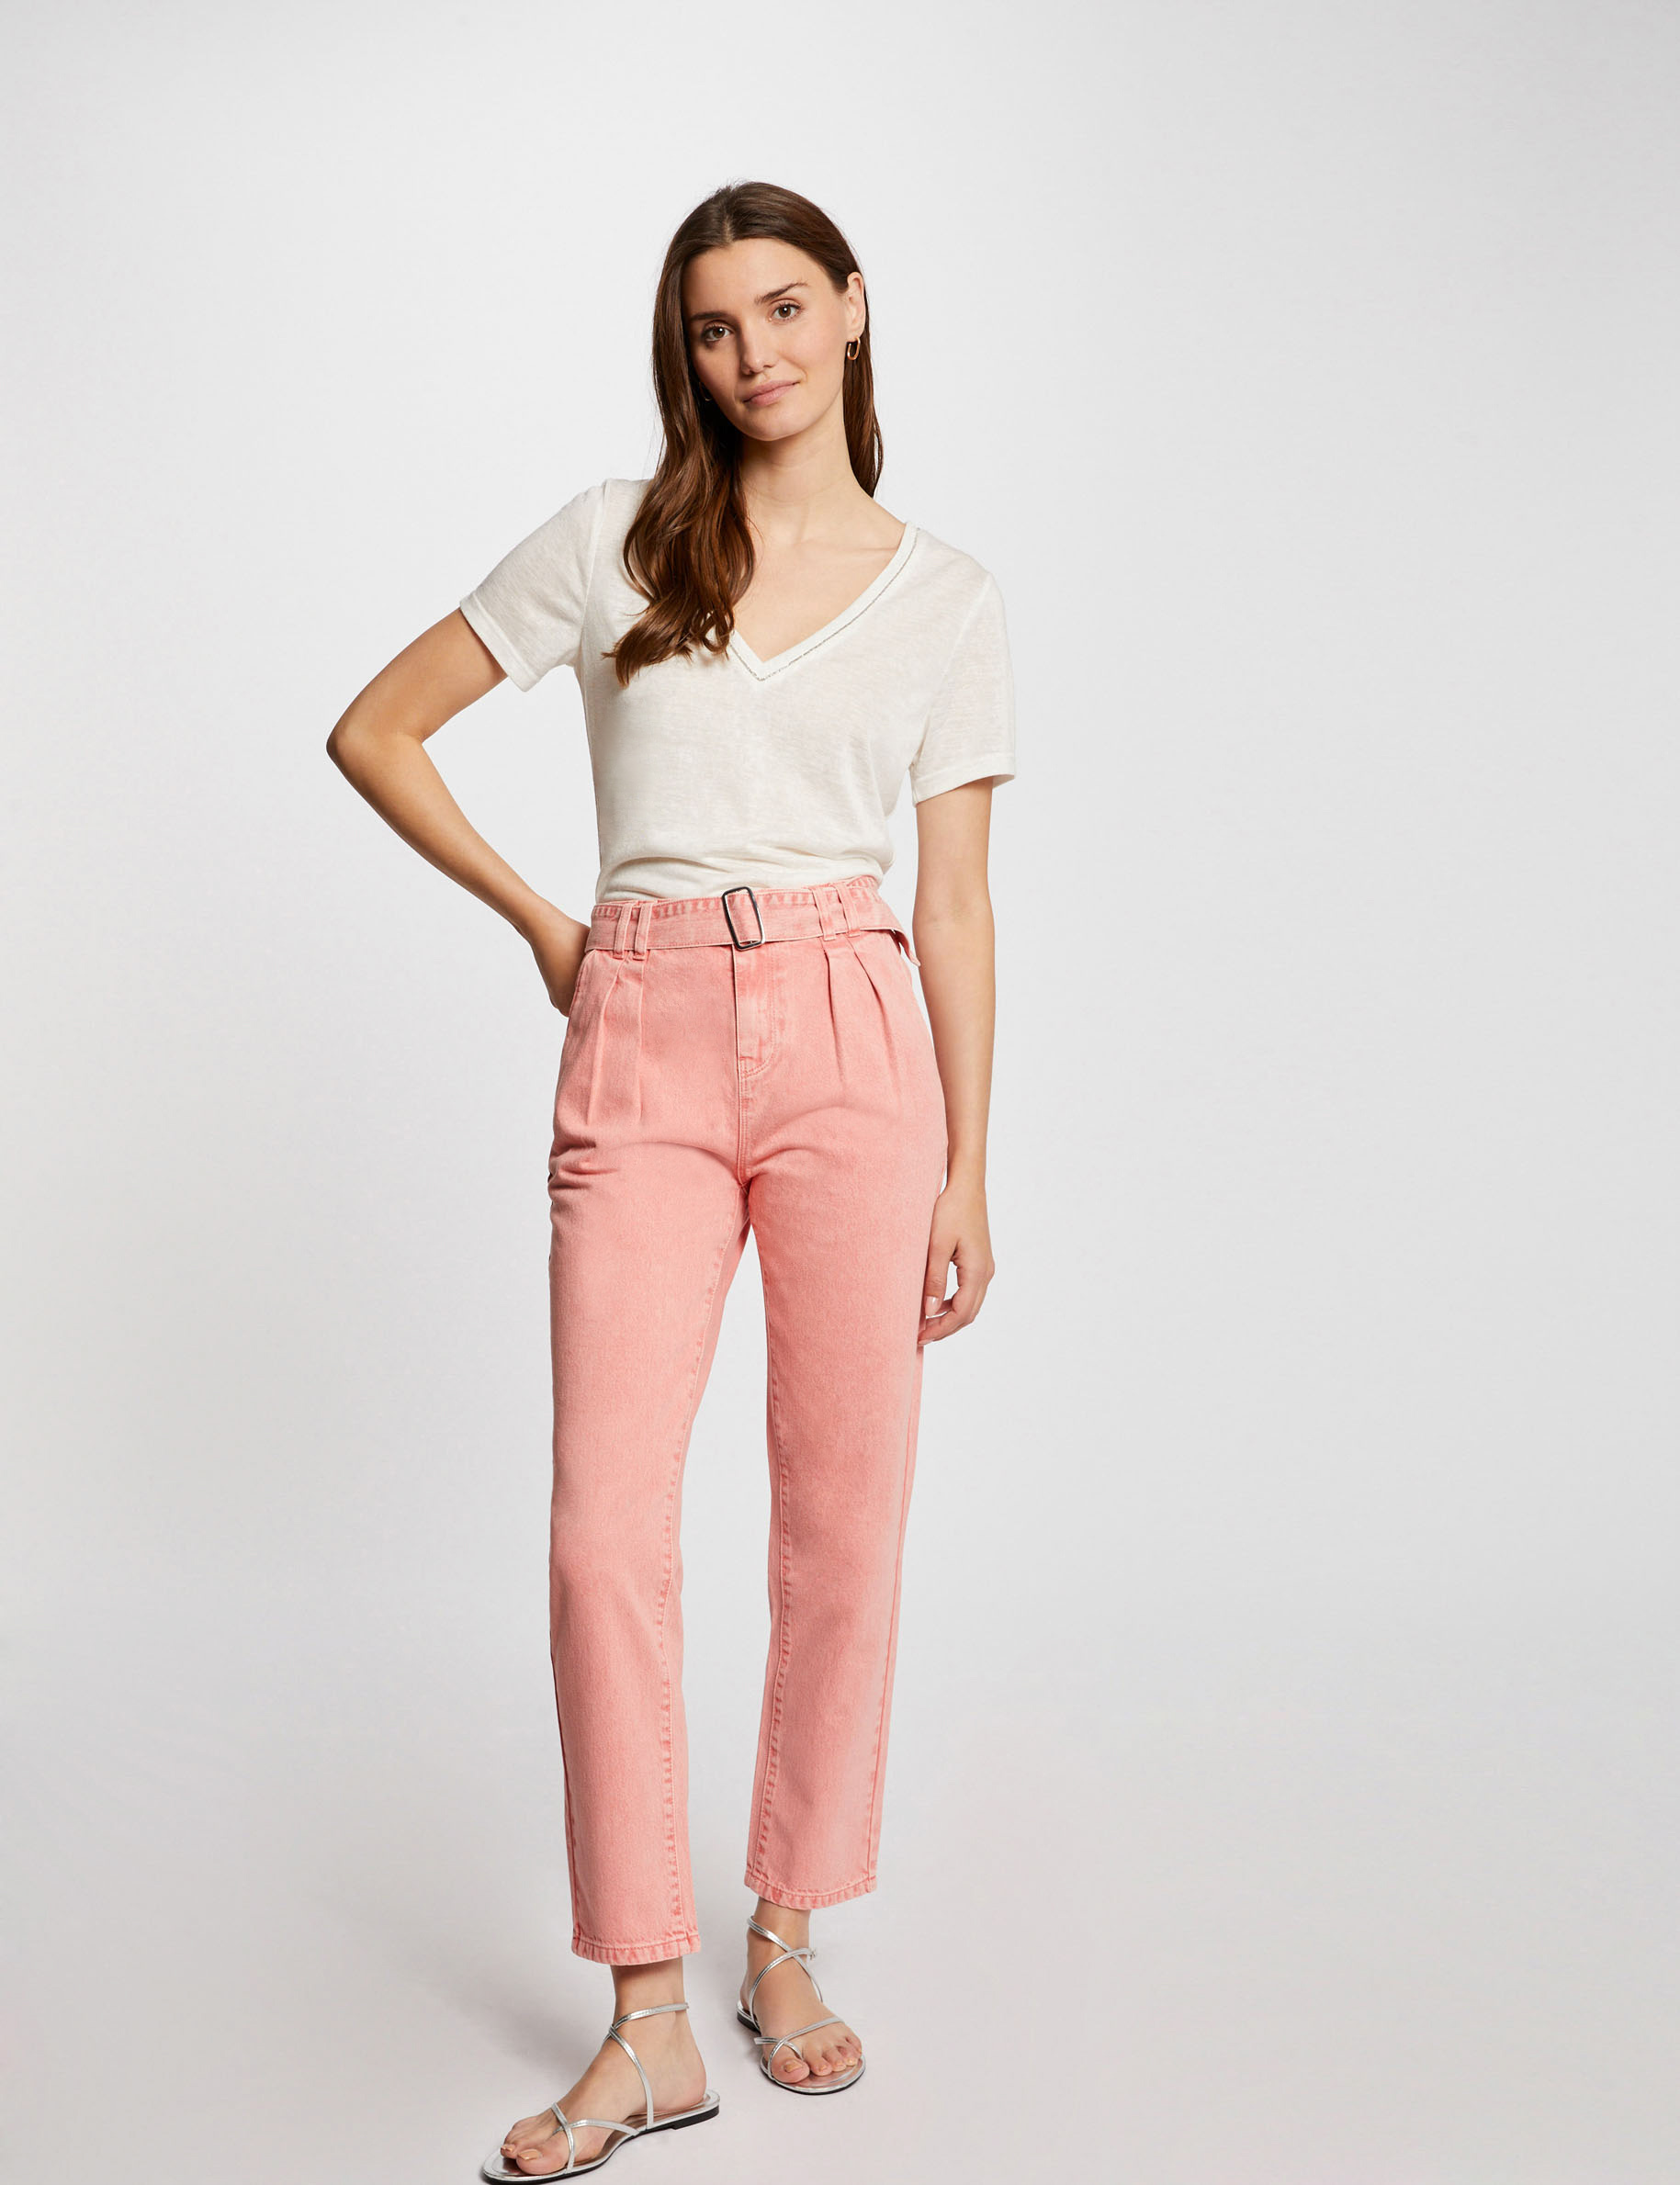 Cropped straight belted jeans coral ladies'